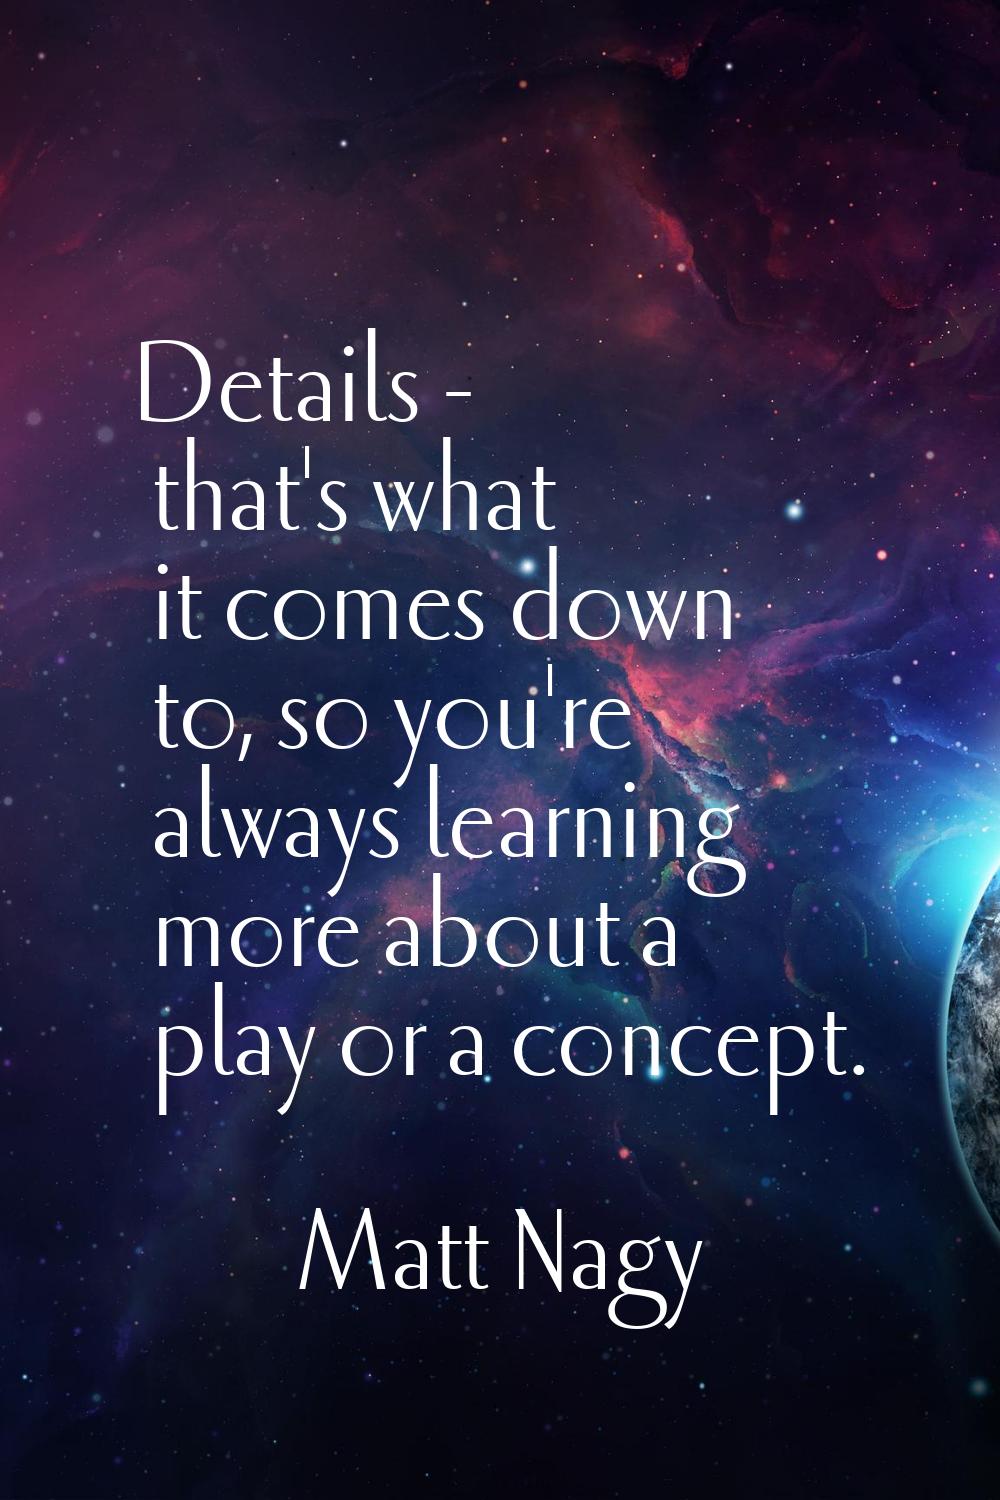 Details - that's what it comes down to, so you're always learning more about a play or a concept.